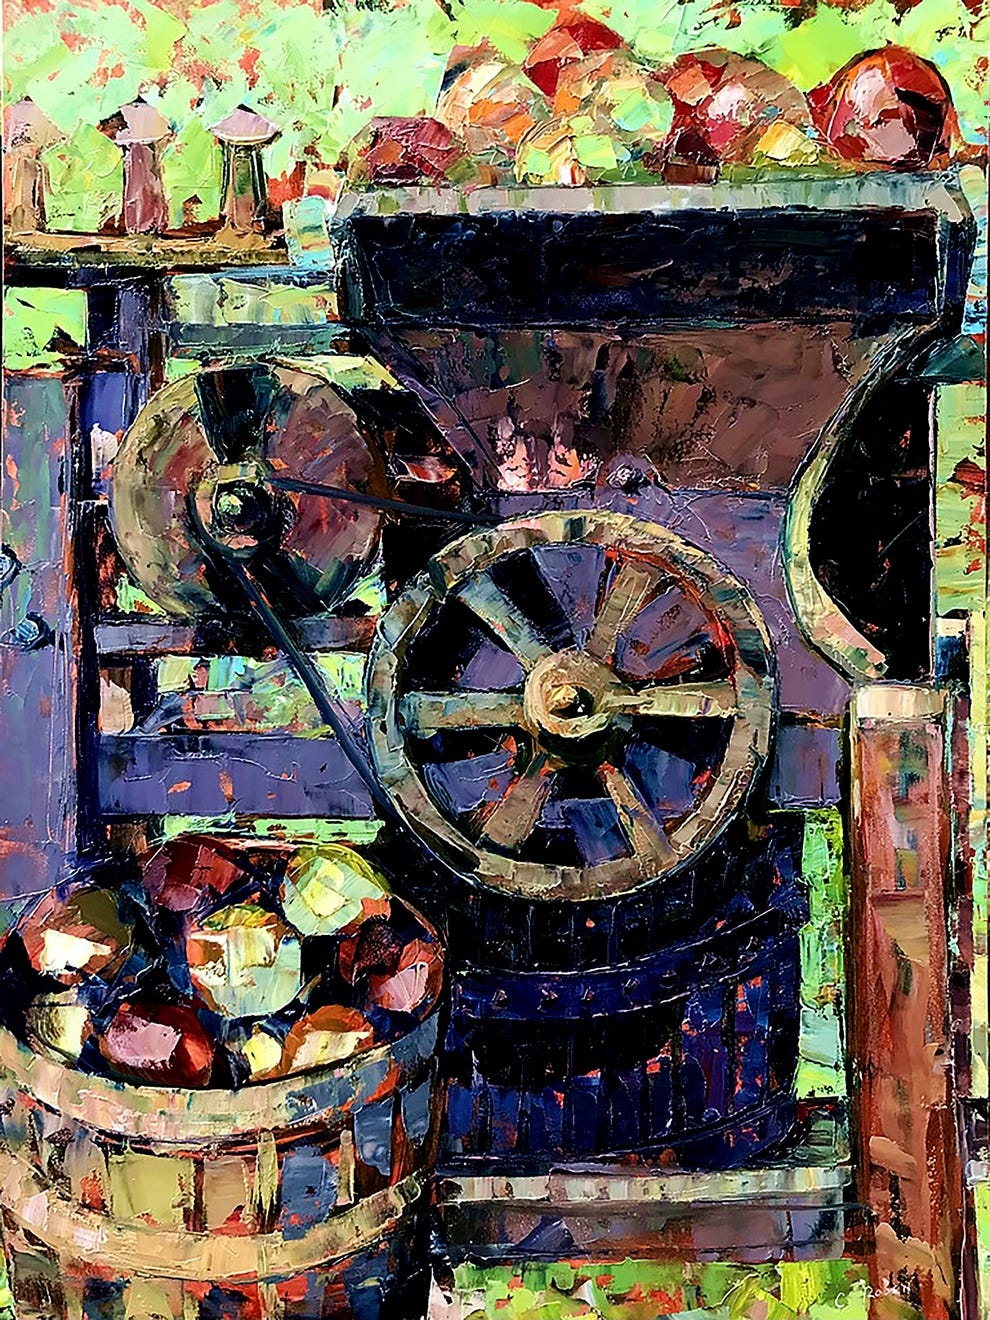 A painting of a machine

Description automatically generated